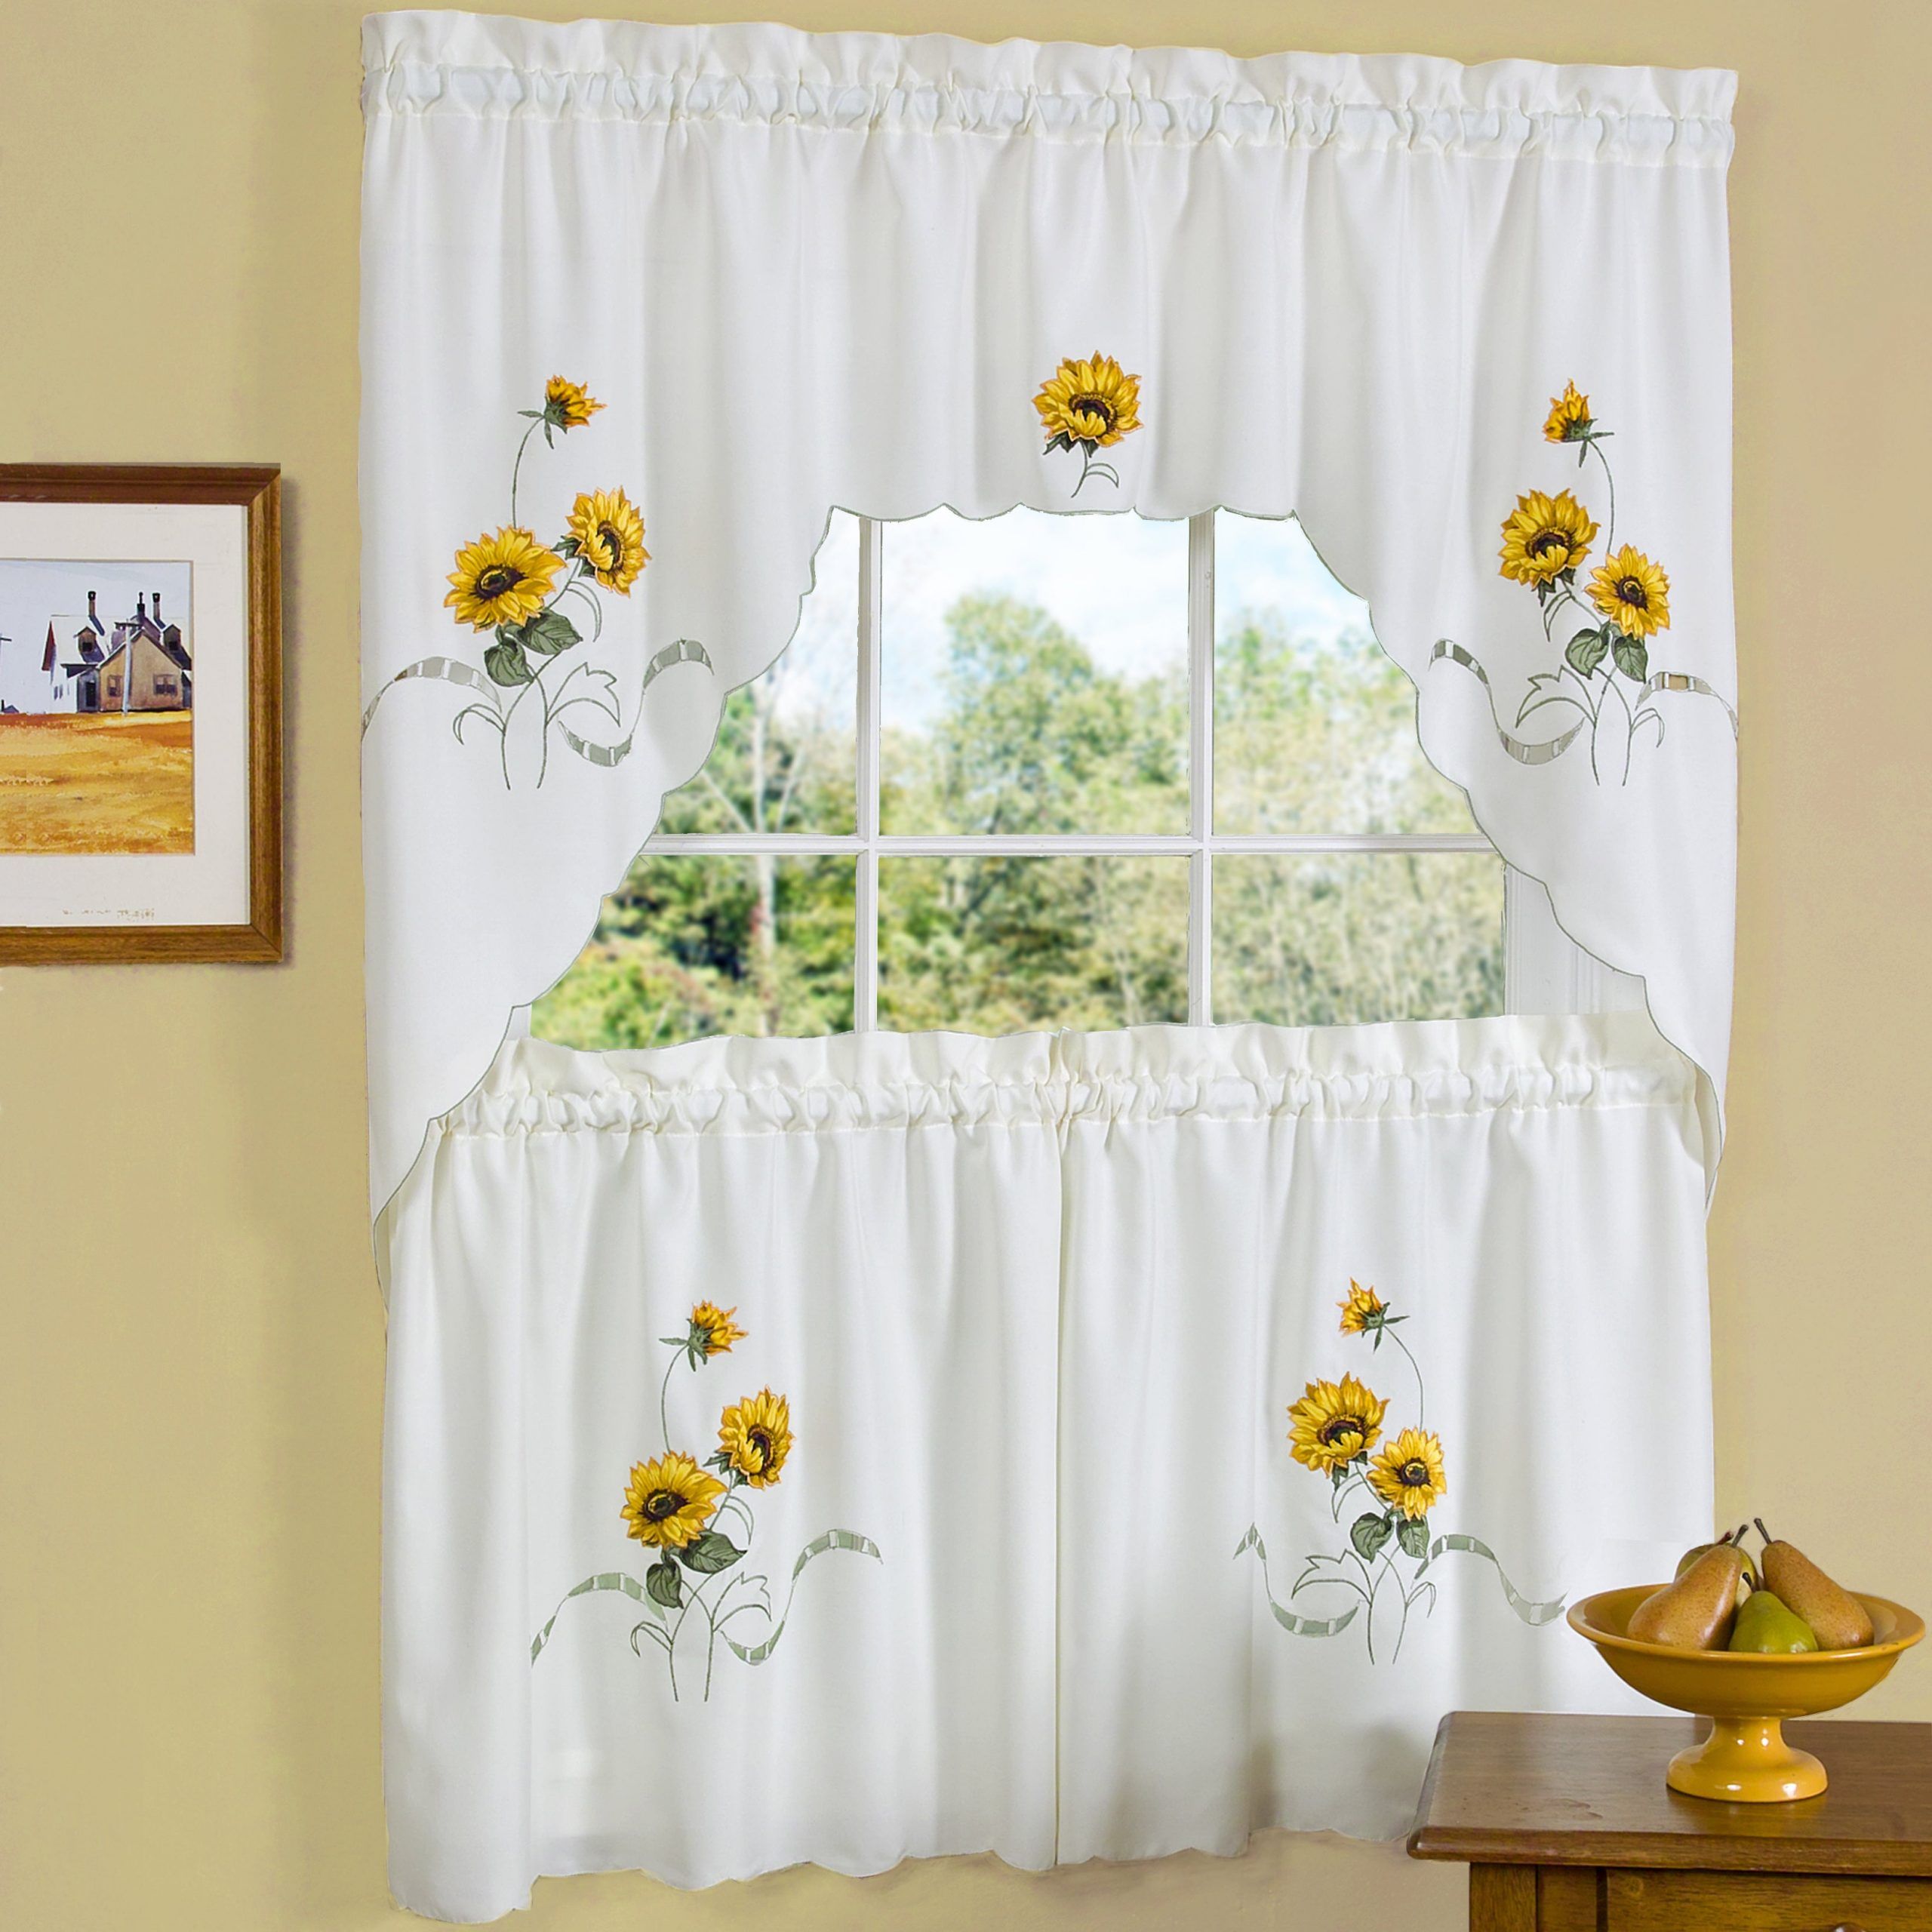 Traditional Two Piece Tailored Tier And Swag Window Curtains Set With  Embroidered Yellow Sunflowers – 36 Inch With Window Curtains Sets With Colorful Marketplace Vegetable And Sunflower Print (View 3 of 20)